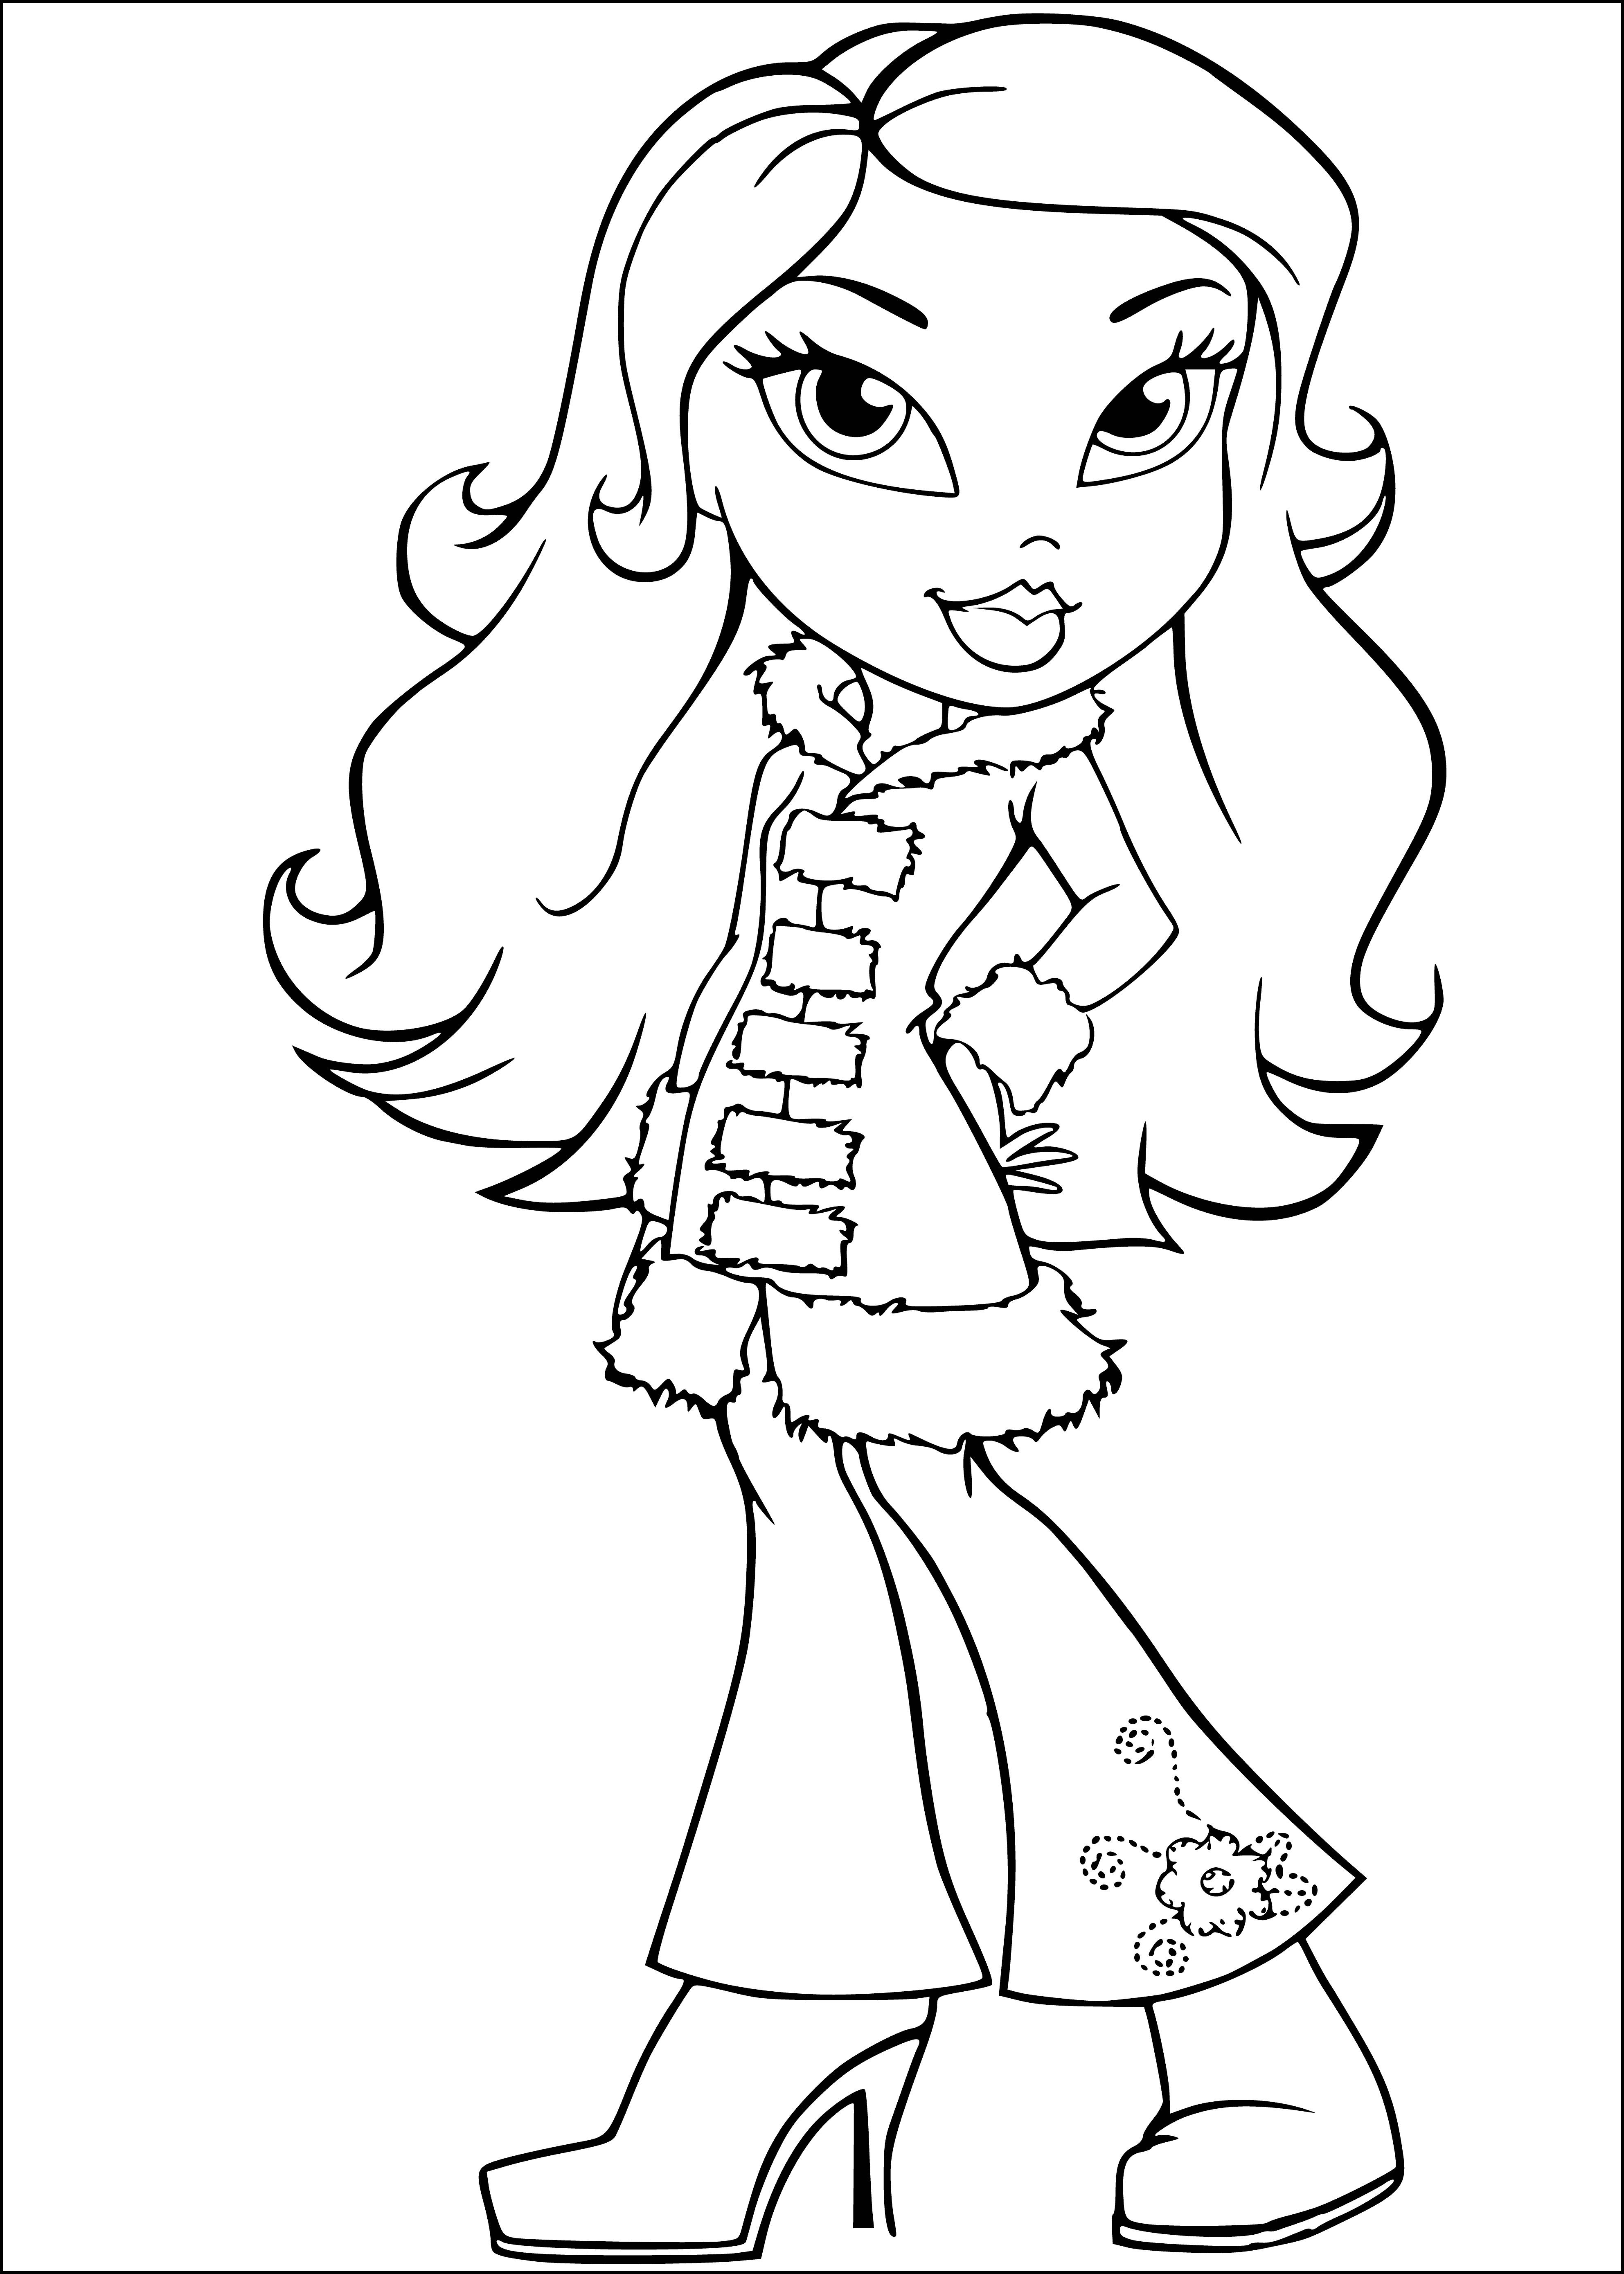 coloring page: Group of 4 fashion dolls with big heads, eyes, colorful clothes & diff. hairstyles.